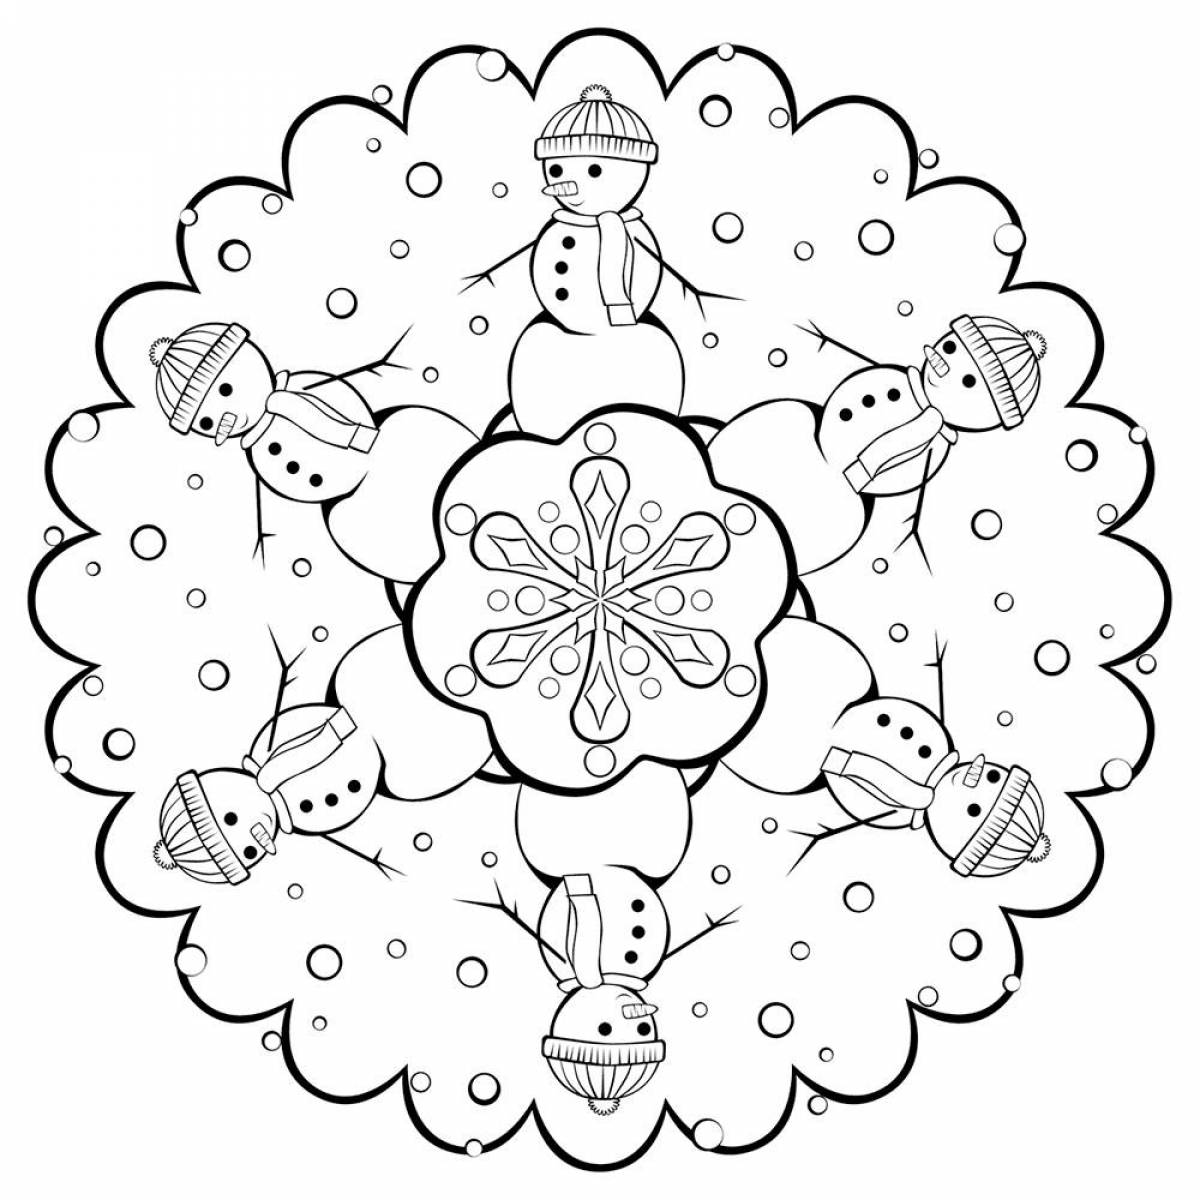 Innovative snowflake coloring book for kids 5-6 years old